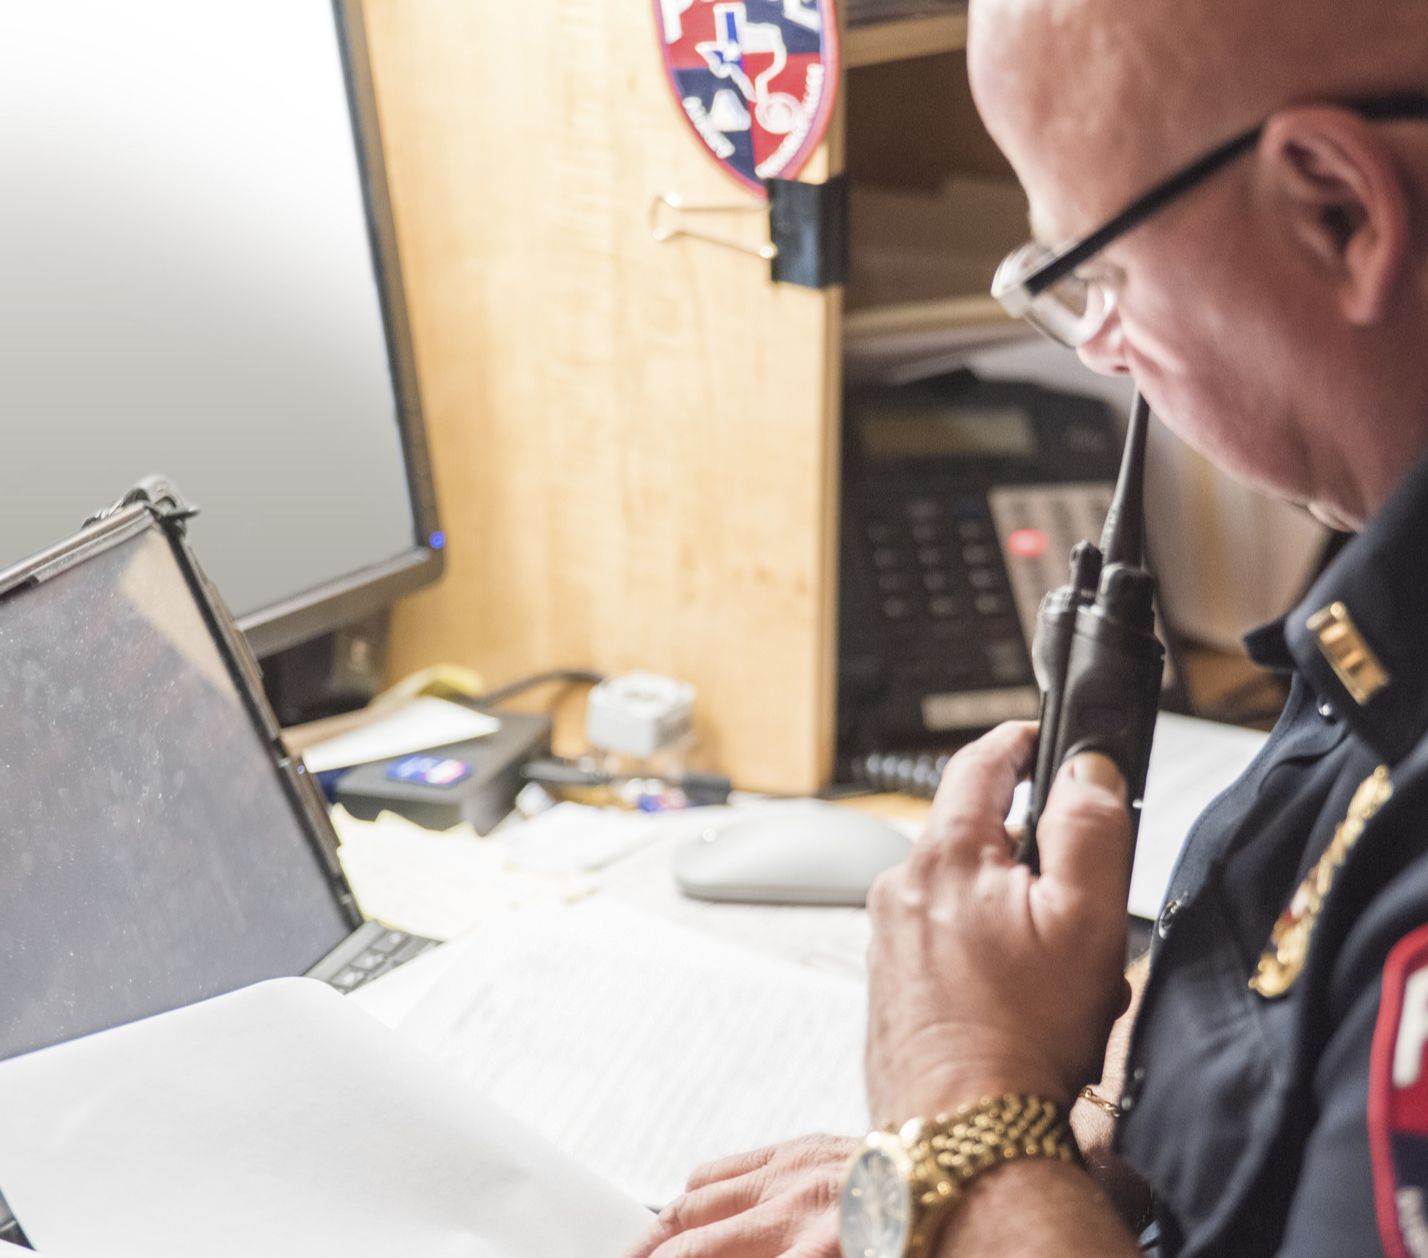 Correctional officer duties: How to write a better report